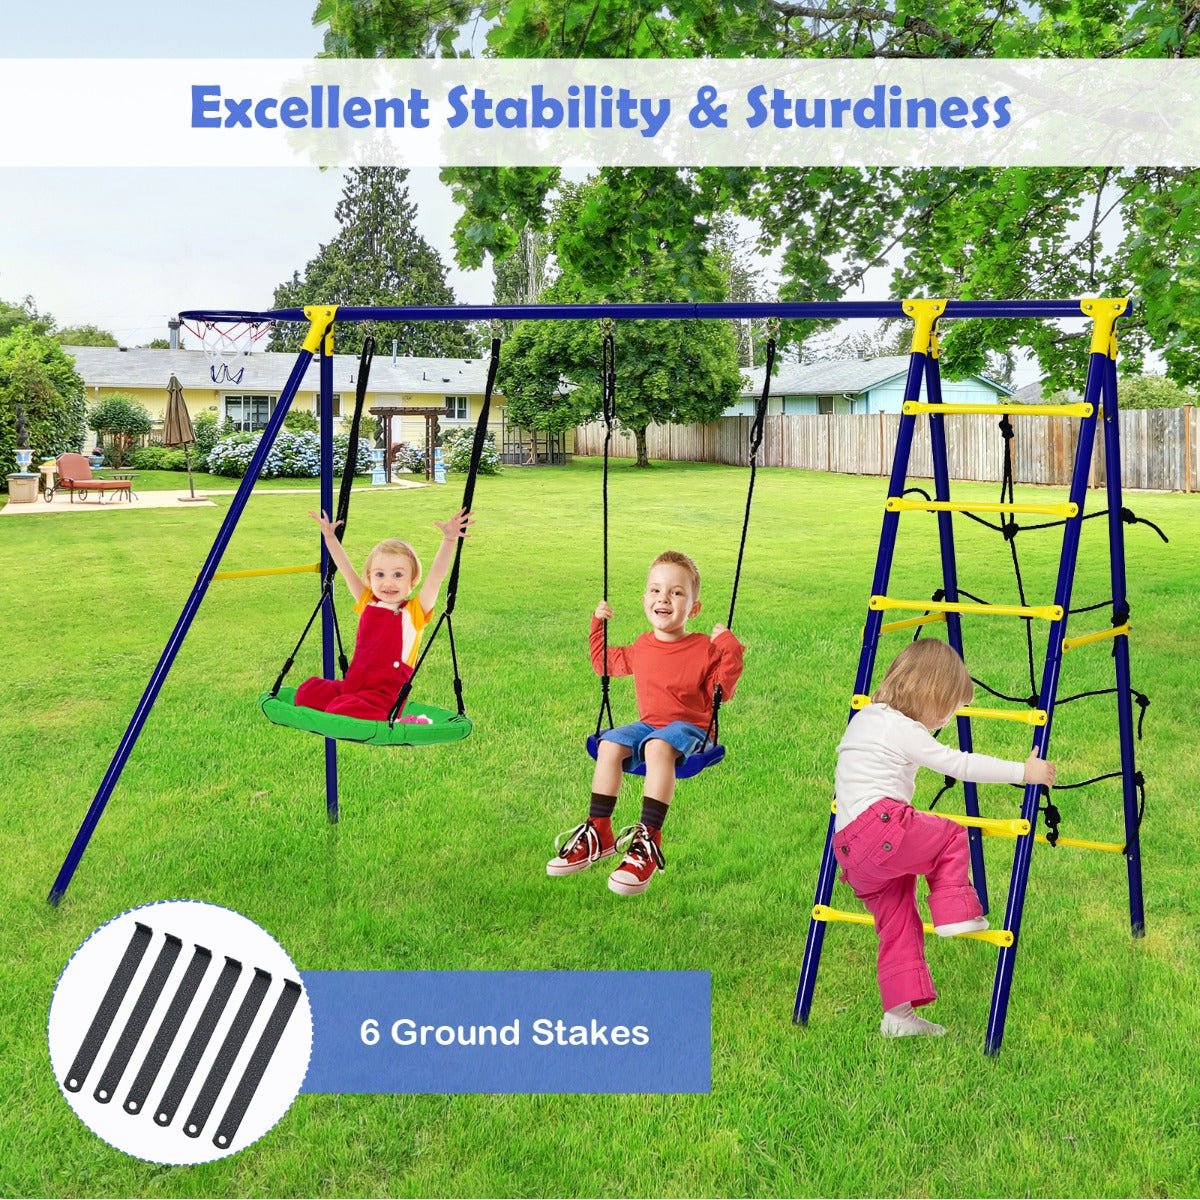 colourful 5-in-1 Swing Set: A-Shaped Metal Frame for Children's Fun